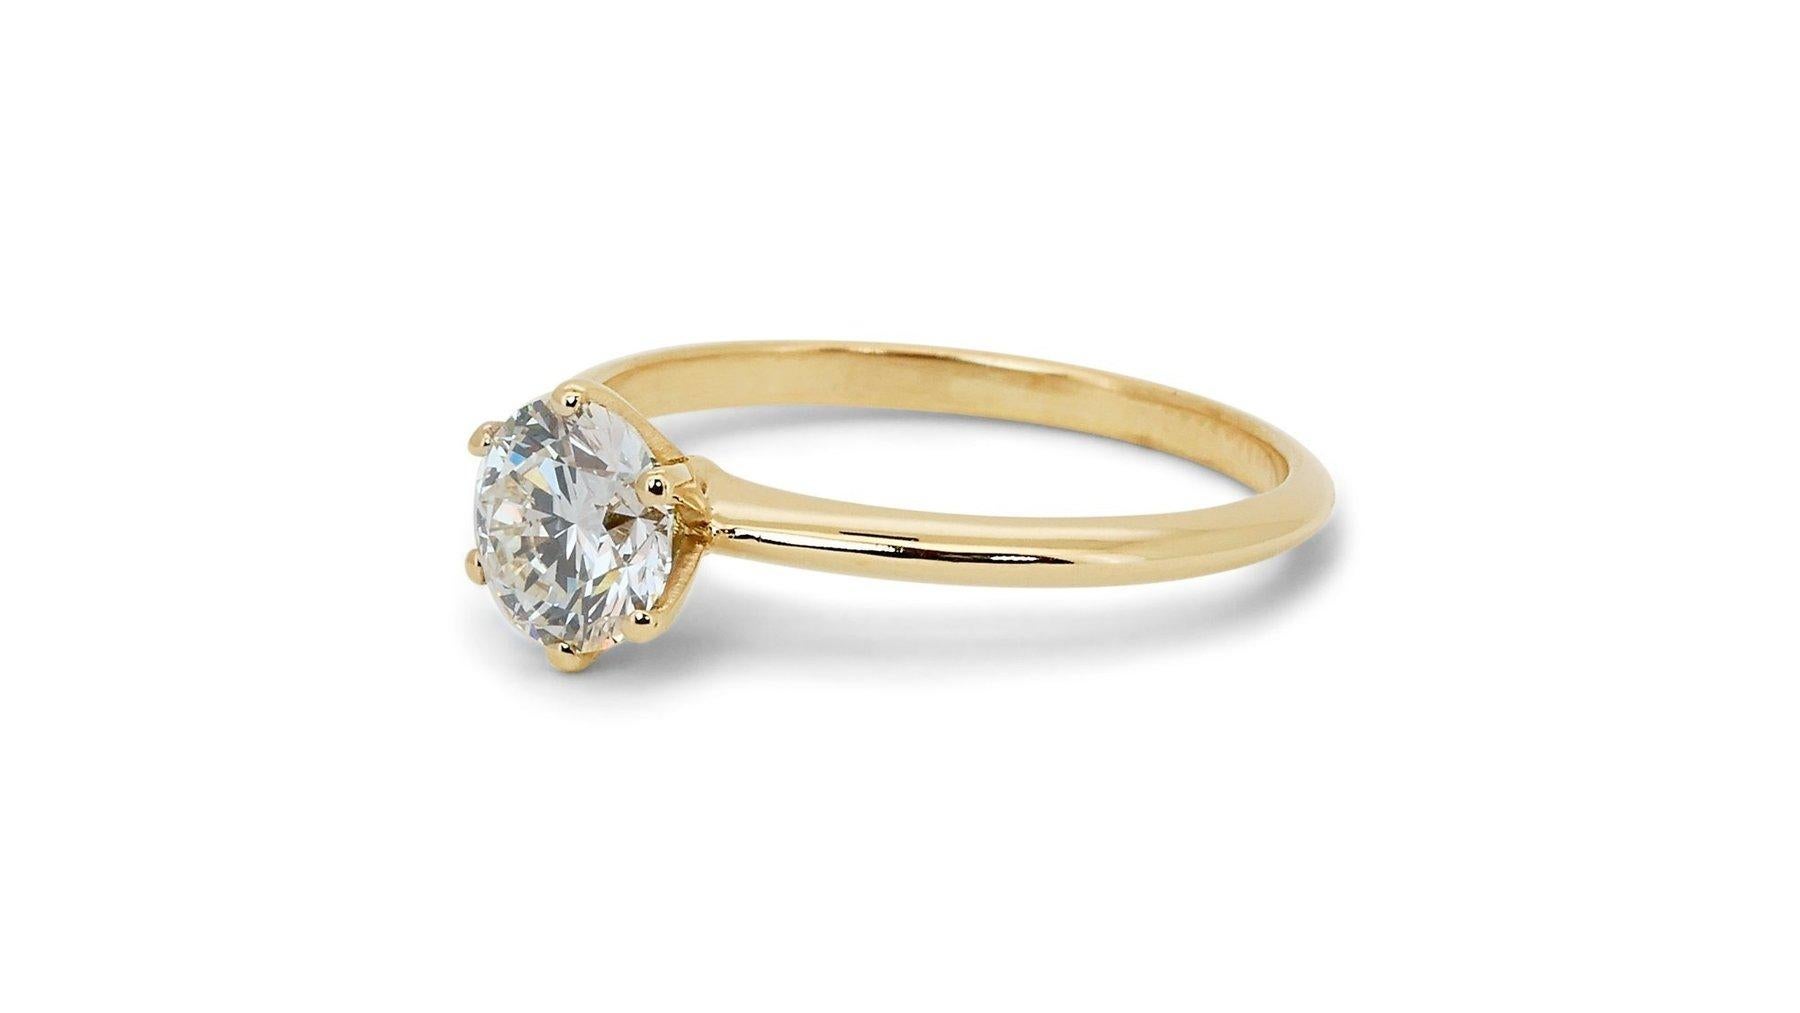 Round Cut Lustrous 1.07ct Diamond Solitaire Ring in 18k Yellow Gold - GIA Certified For Sale